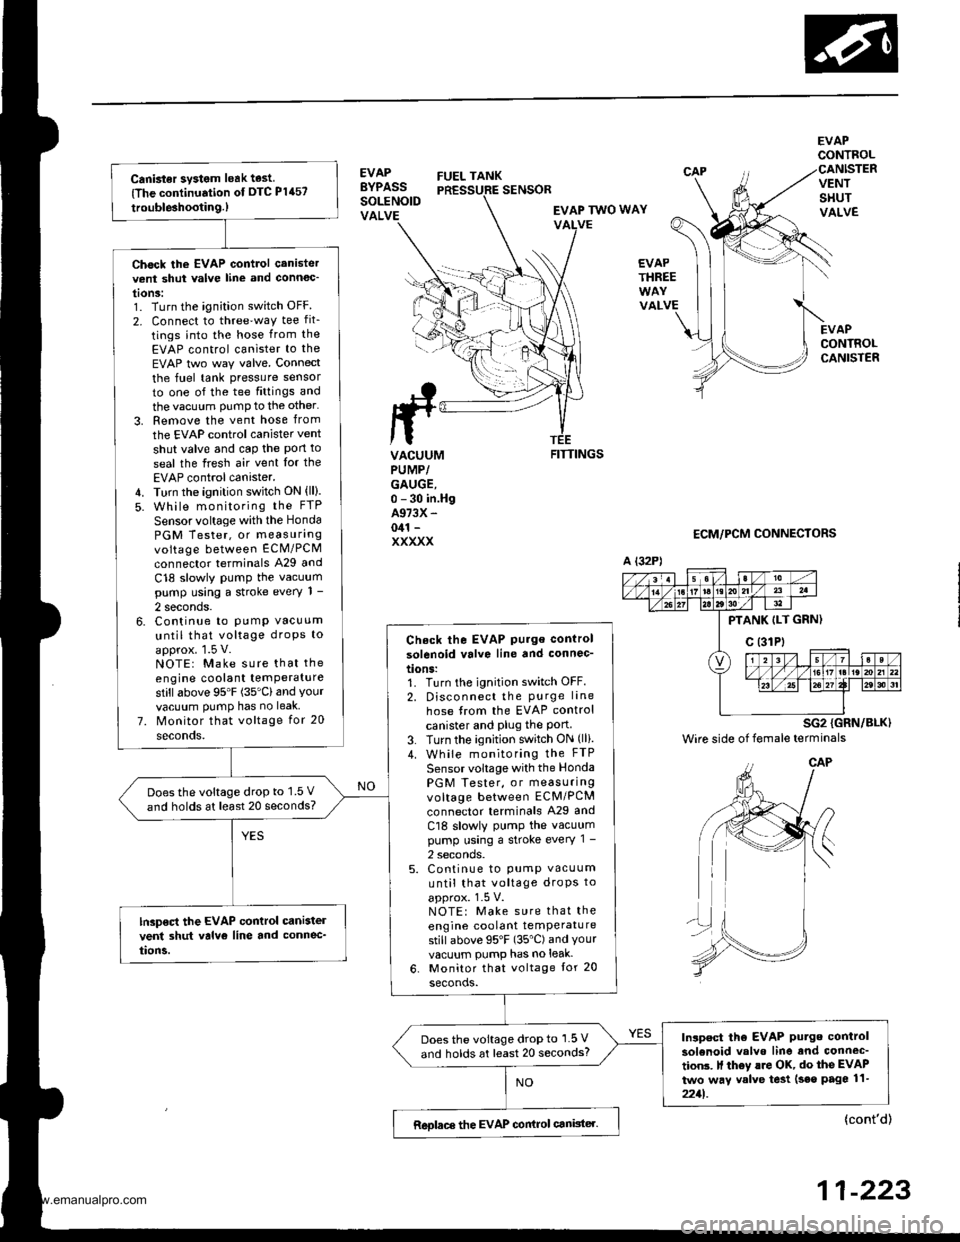 HONDA CR-V 1998 RD1-RD3 / 1.G Service Manual 
Canbter system leak test
{The continuation of DTC P1457
trouble3hootin9.)
Chock the EVAP control canistervent shut valve line and connoc
tonS:1. Turn the ignition switch OFF
2. Connect to threeway 